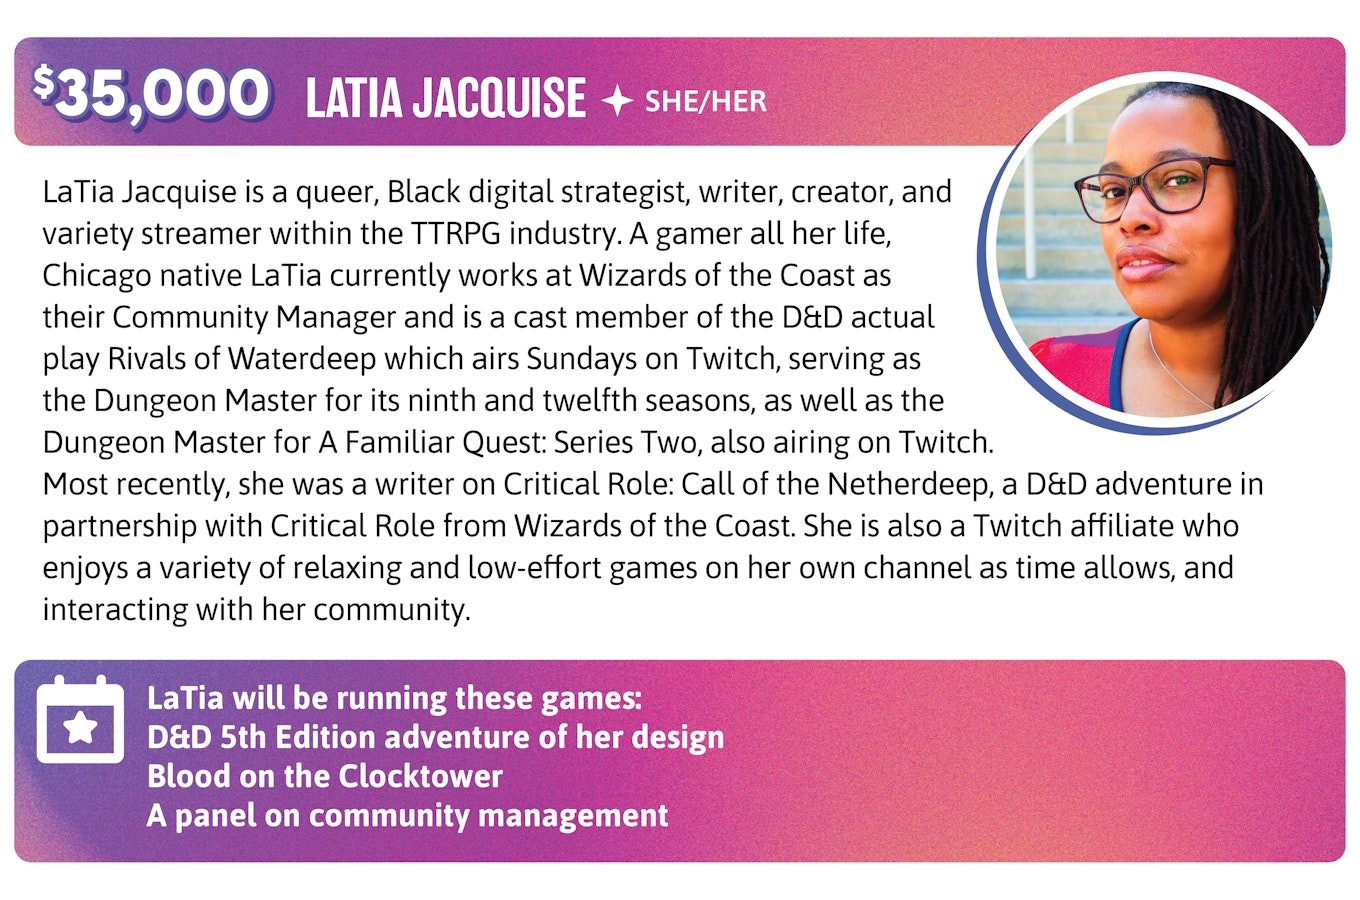 Stretch Goal $35,000. LaTia Jacquise is a queer, Black digital strategist, writer, creator, and variety streamer within the TTRPG industry. A gamer all her life, Chicago native LaTia currently works at Wizards of the Coast as their Community Manager and is a cast member of the D&D actual play Rivals of Waterdeep which airs Sundays on Twitch, serving as the Dungeon Master for its ninth and twelfth seasons, as well as the Dungeon Master for A Familiar Quest: Series Two, also airing on Twitch. Most recently, she was a writer on Critical Role: Call of the Netherdeep, a D&D adventure in partnership with Critical Role from Wizards of the Coast. She is also a Twitch affiliate who enjoys a variety of relaxing and low-effort games on her own channel as time allows, and interacting with her community. LaTia will be running these games and panels:  D&D 5th Edition adventure of my design Blood on the Clocktower A panel on community management 